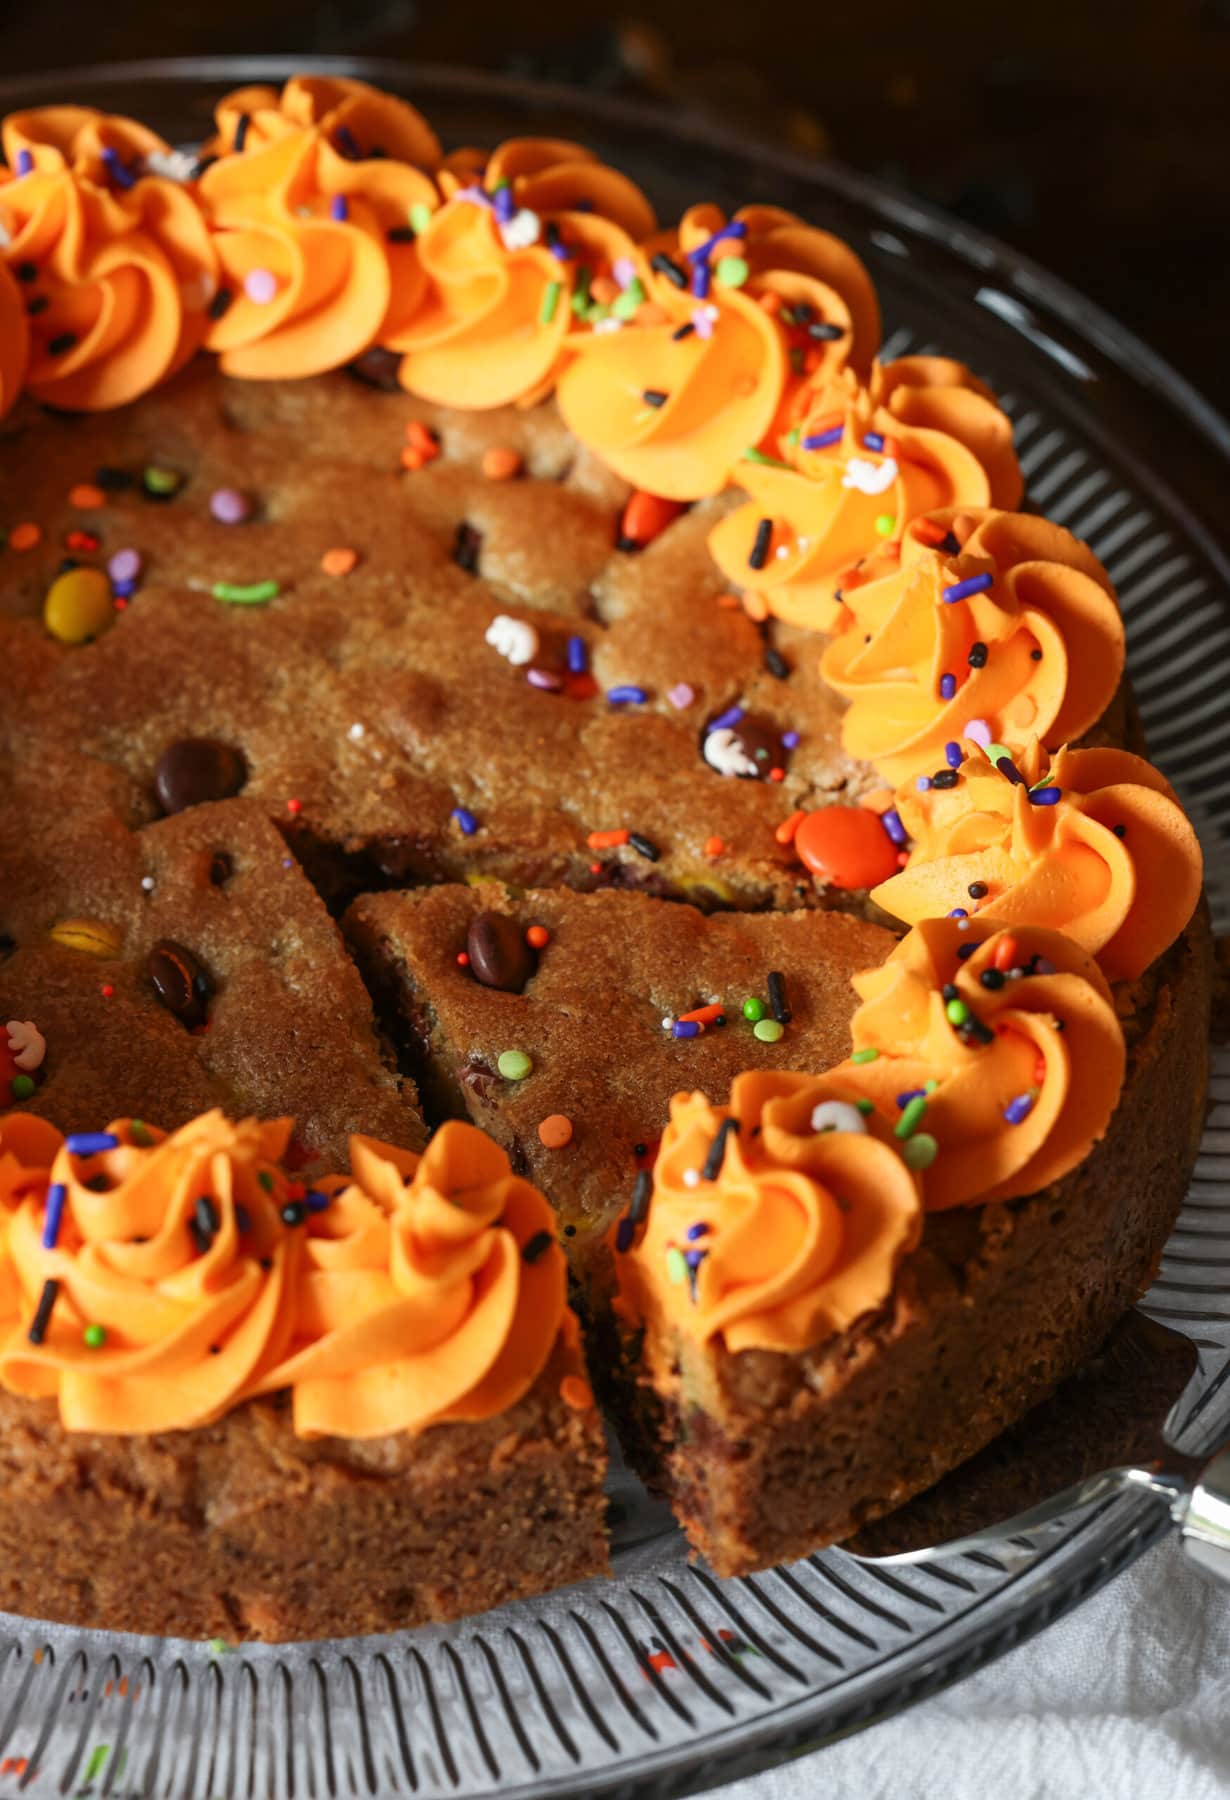 A cookie cake decorated with orange buttercream frosting with a slice being served with a pie serving knife